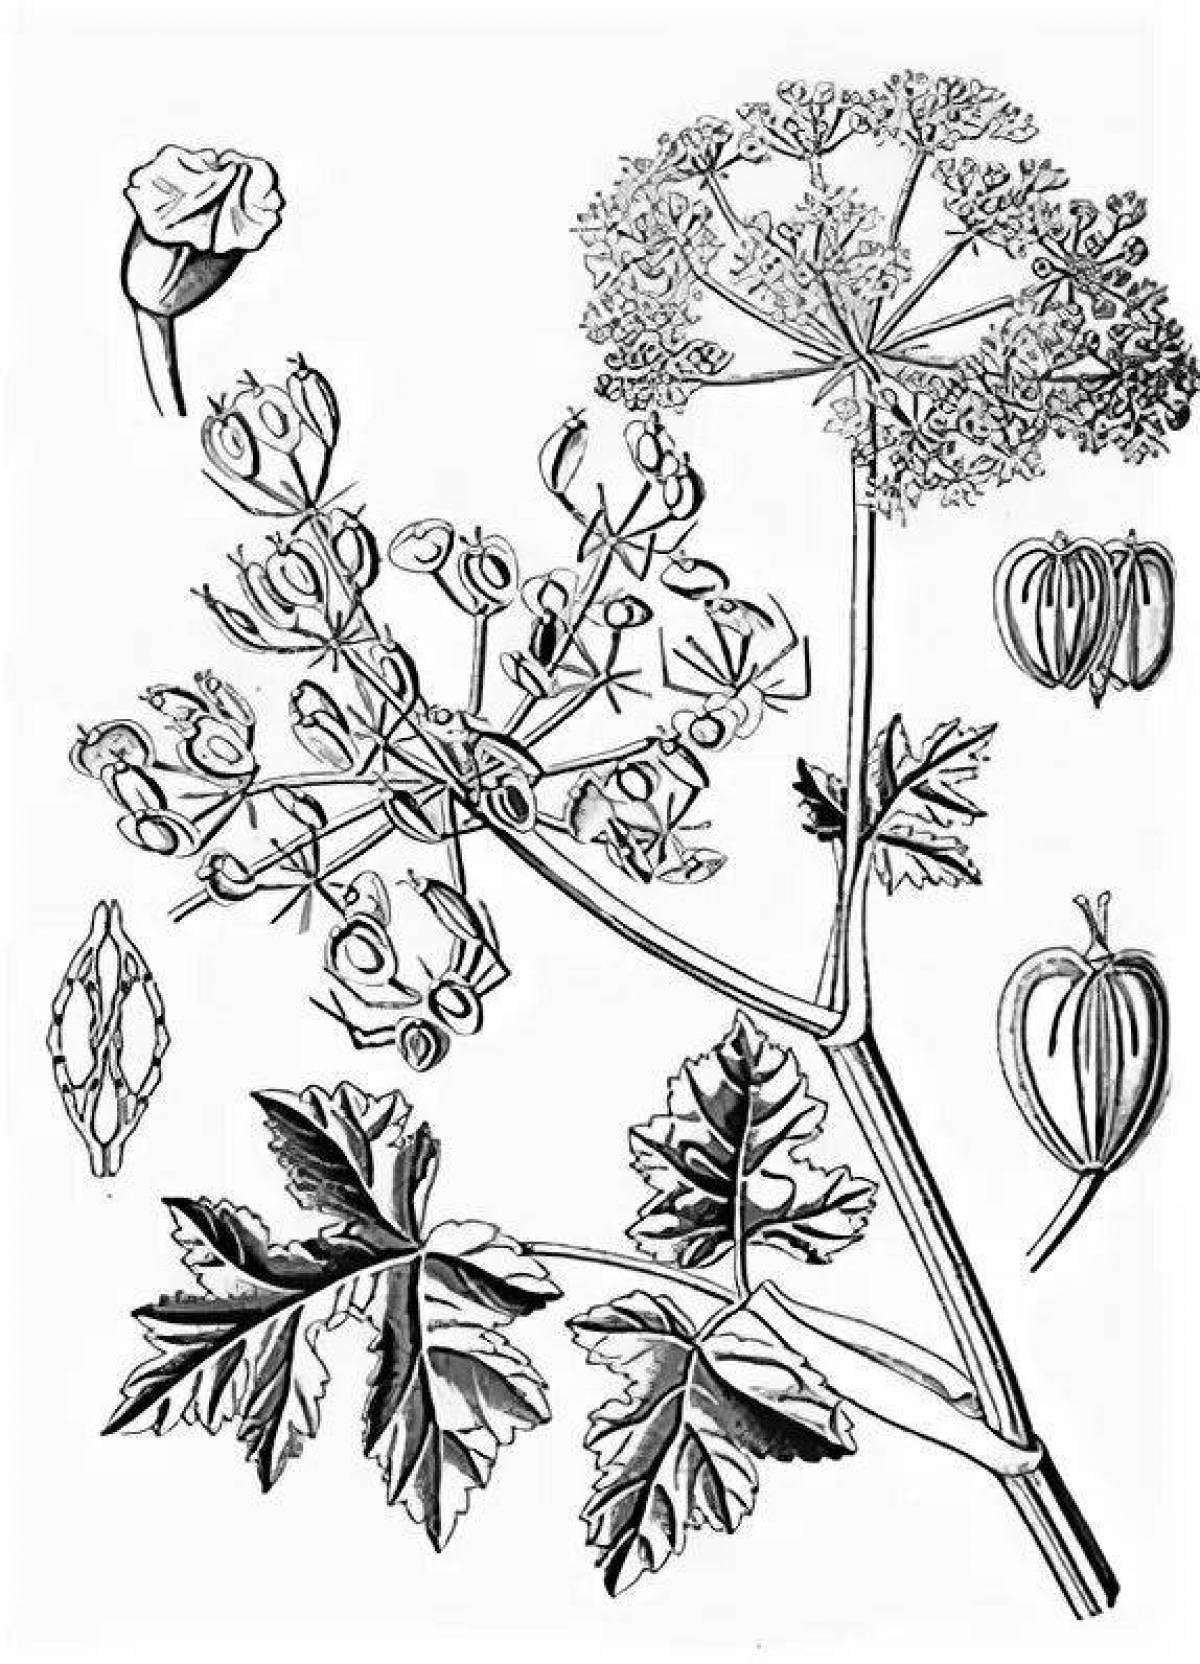 Coloring page solar hogweed